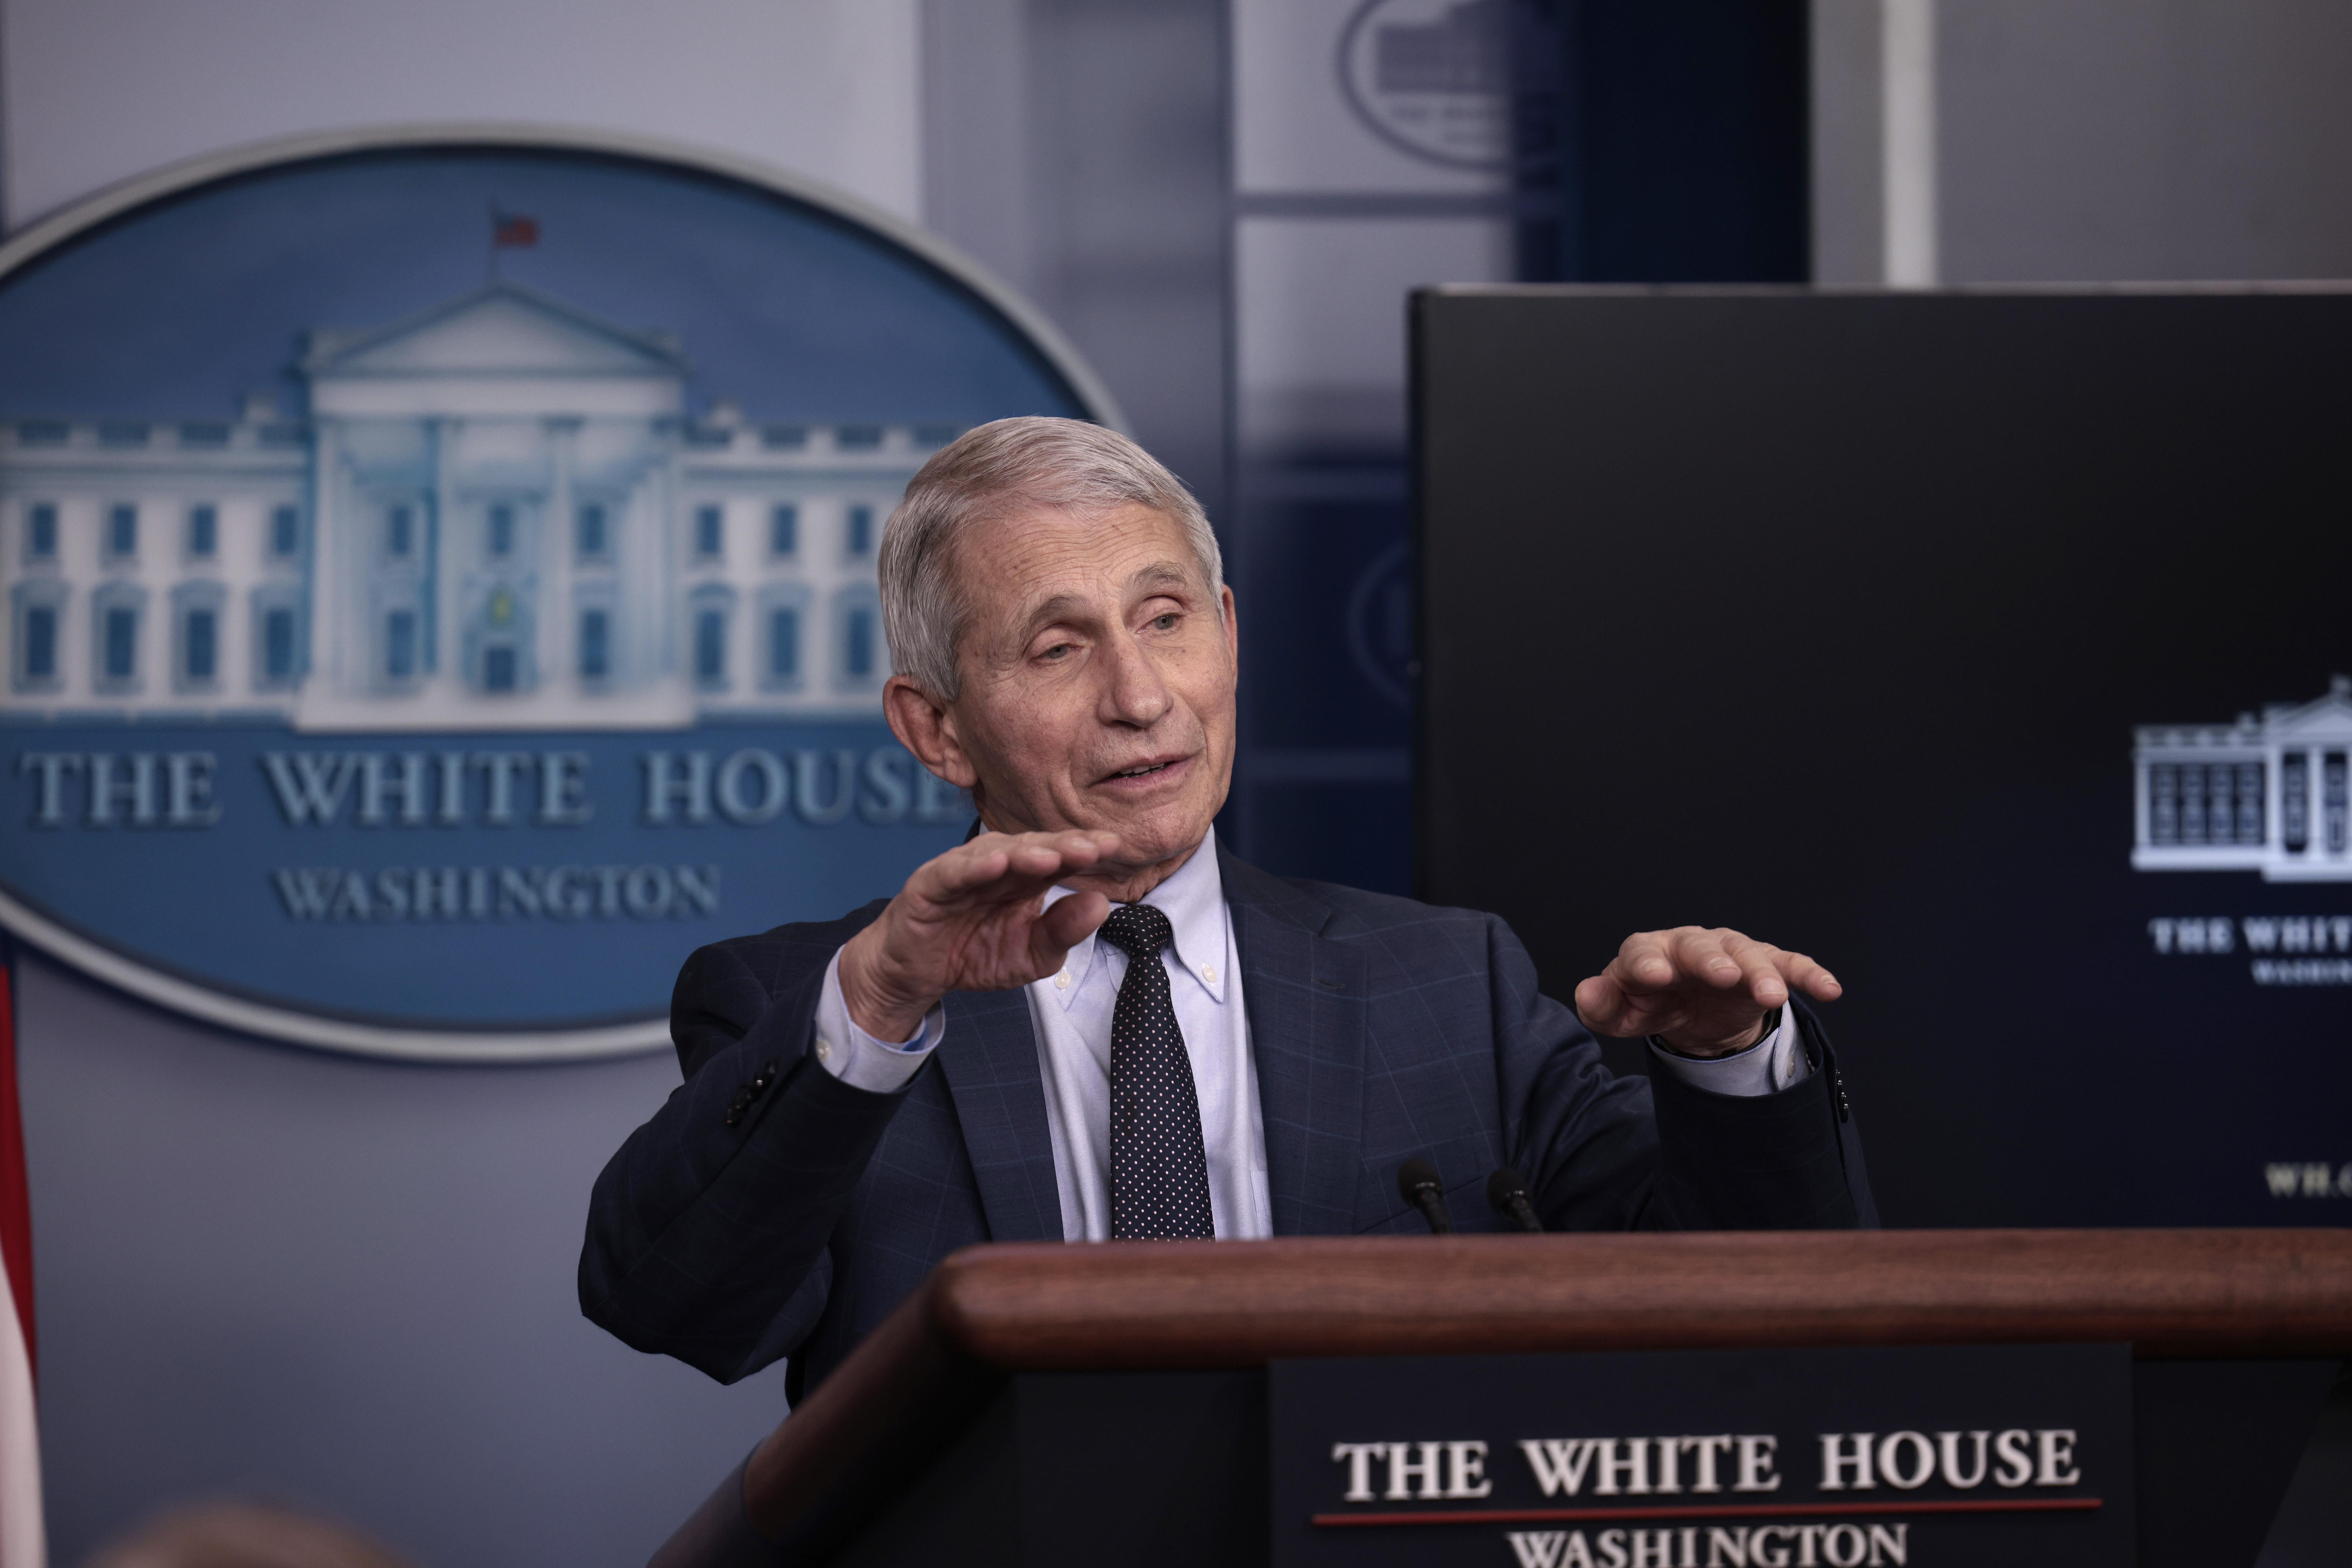 Fauci gestures with both hands as he speaks at a podium in the White House press briefing room